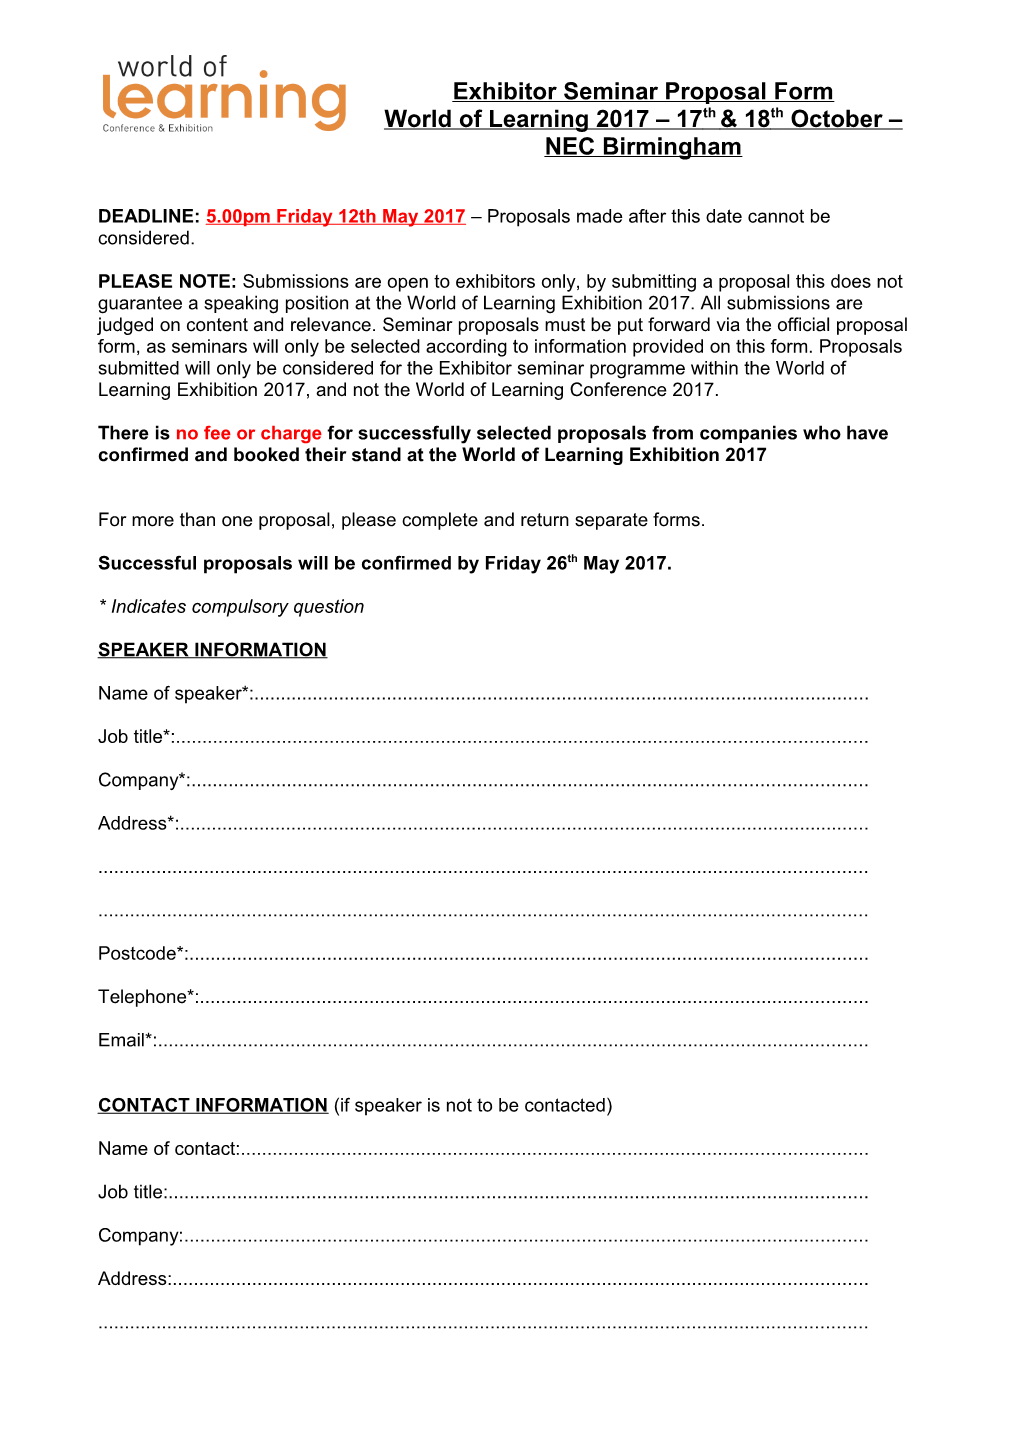 Seminar Proposal Form for the World of Learning 2007